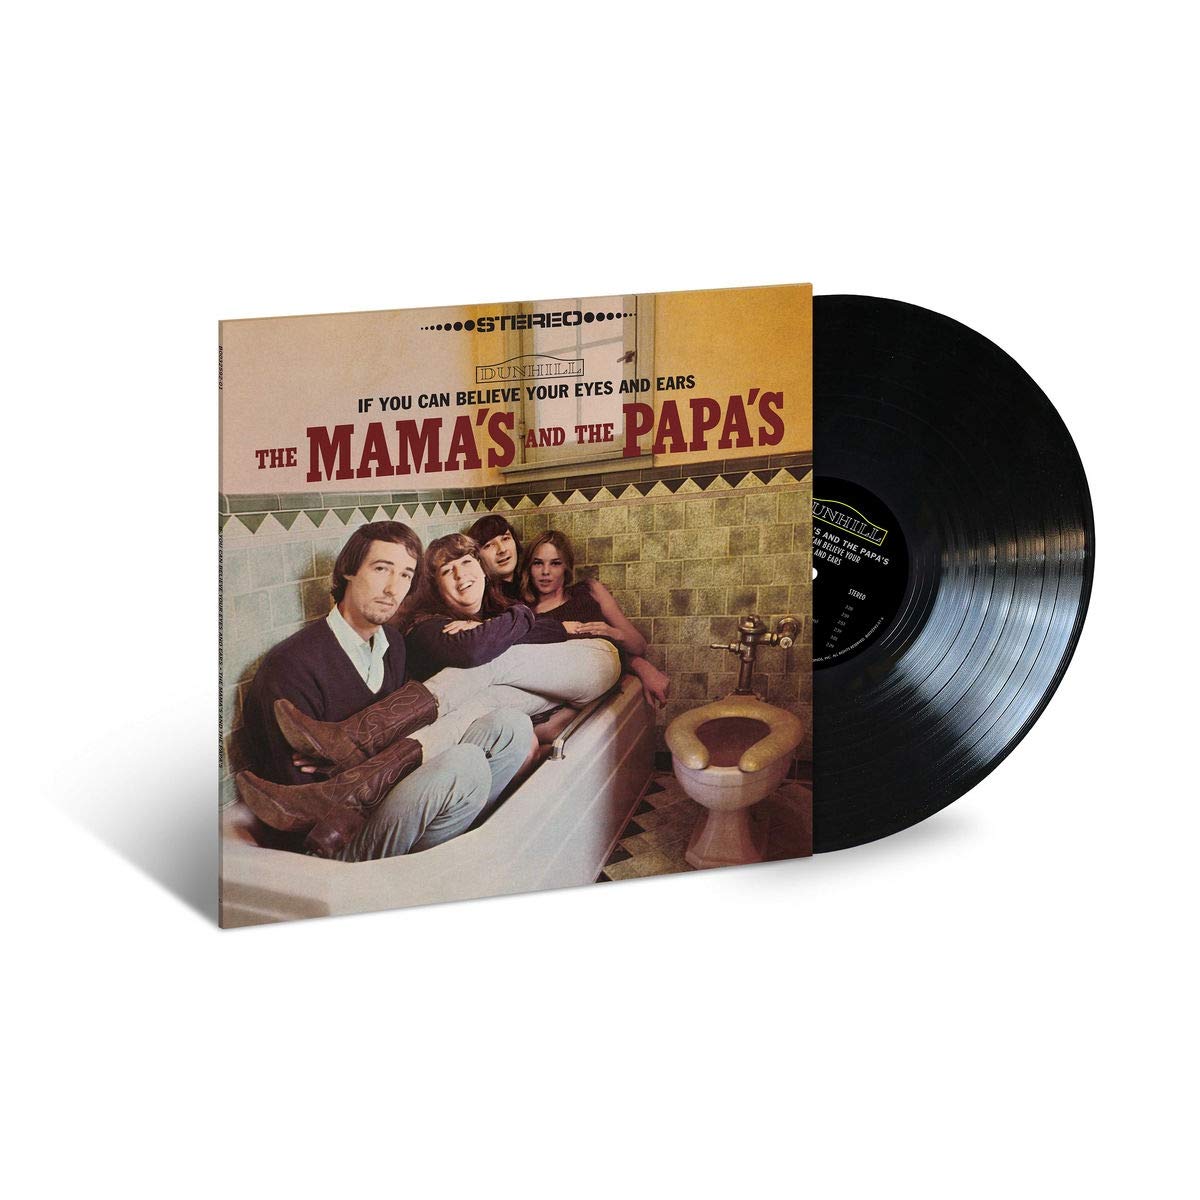 The Mamas & The Papas (마마스 앤 파파스) - 1집 If You Can Believe Your Eyes And Ears [LP] 